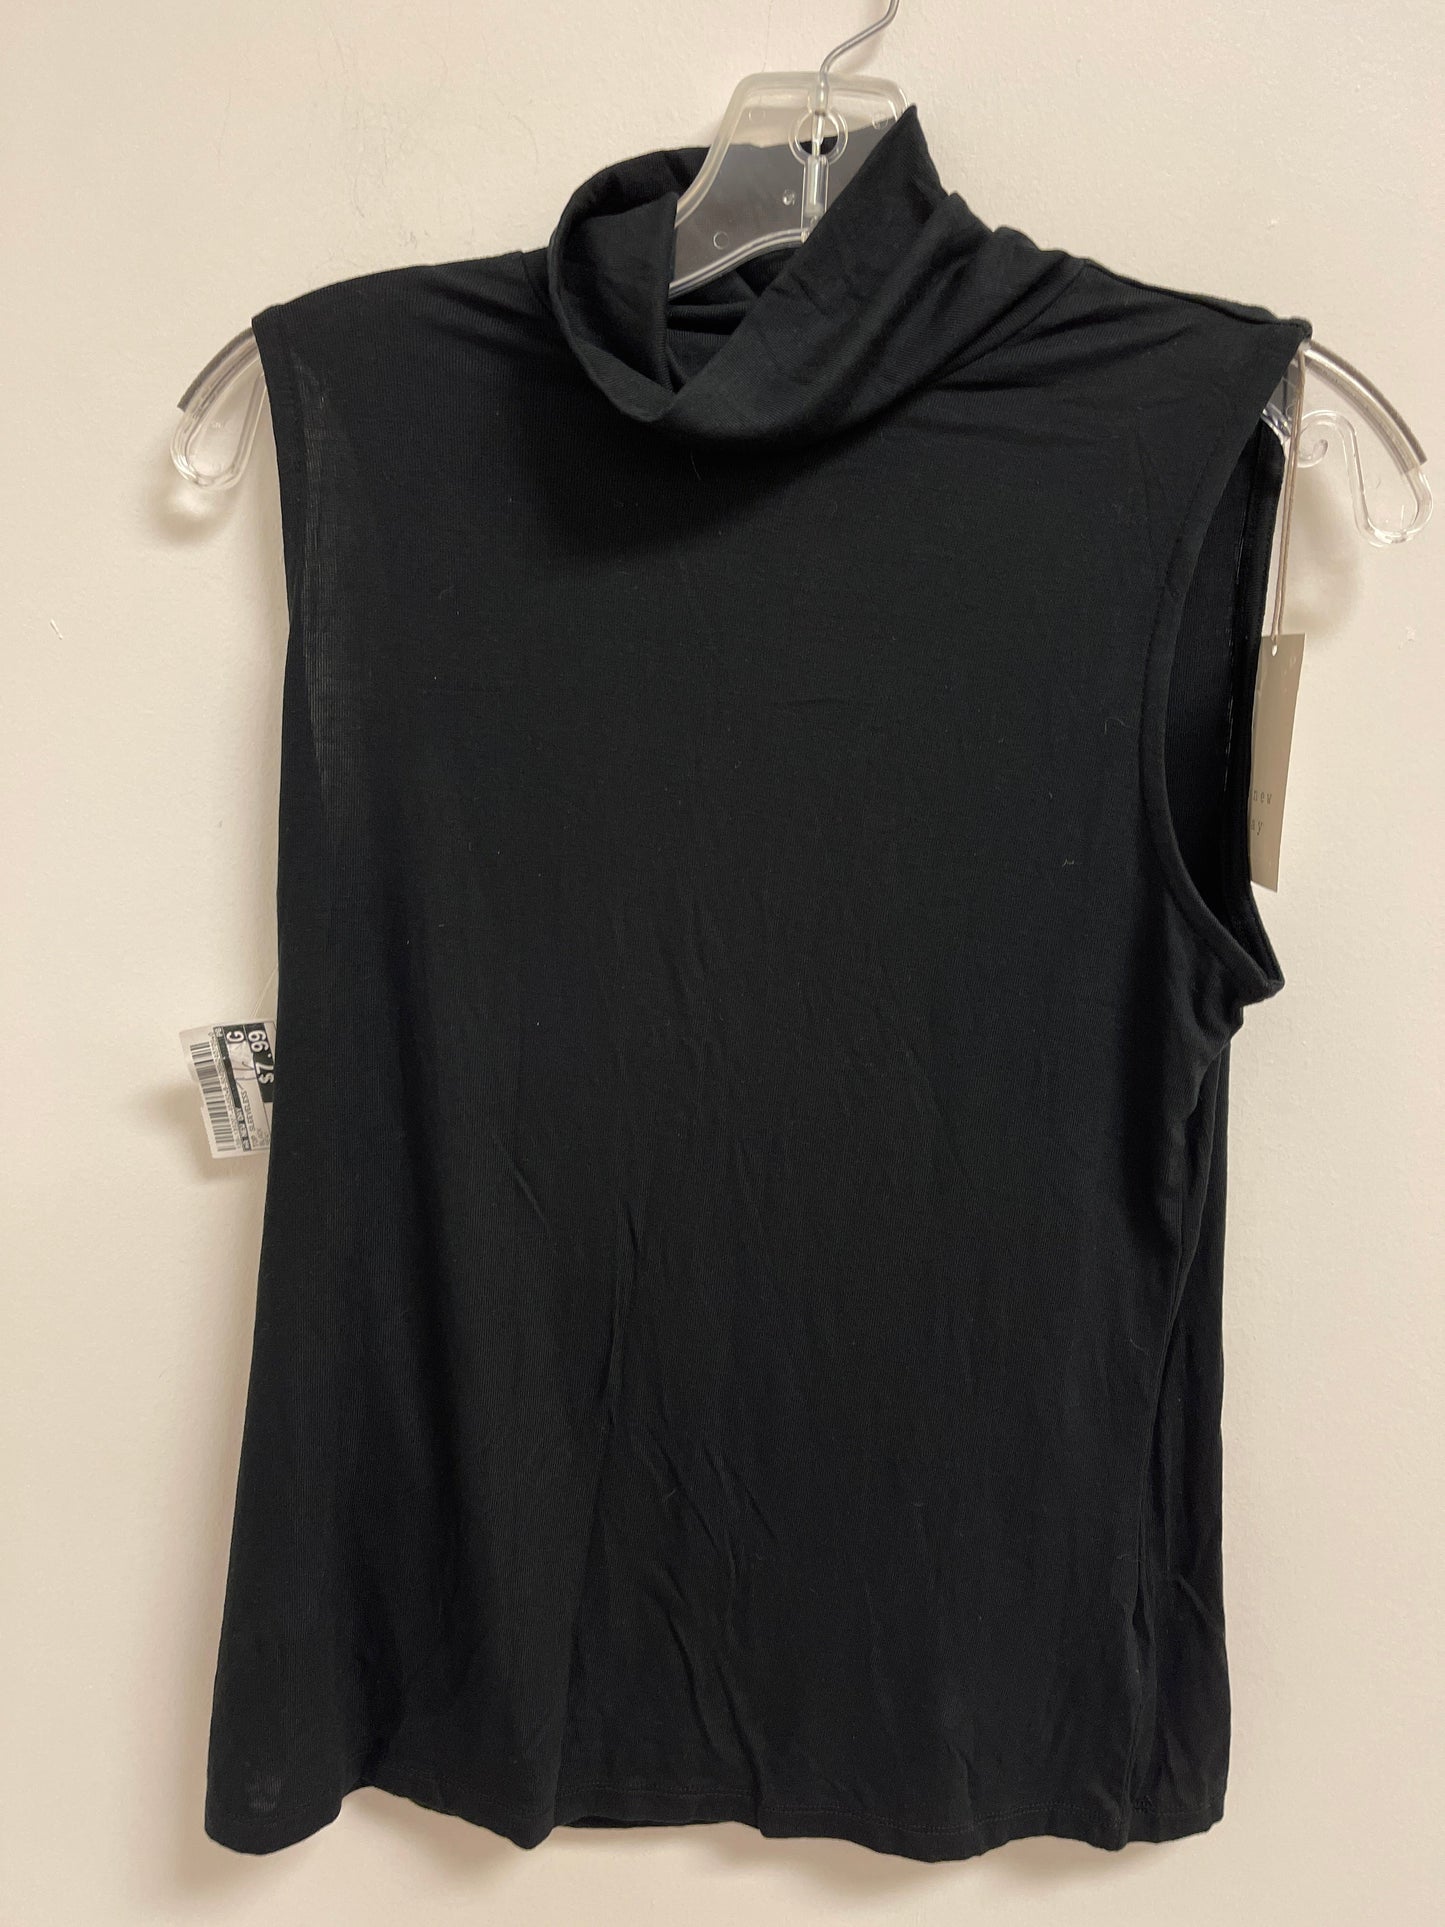 Black Top Sleeveless A New Day, Size M